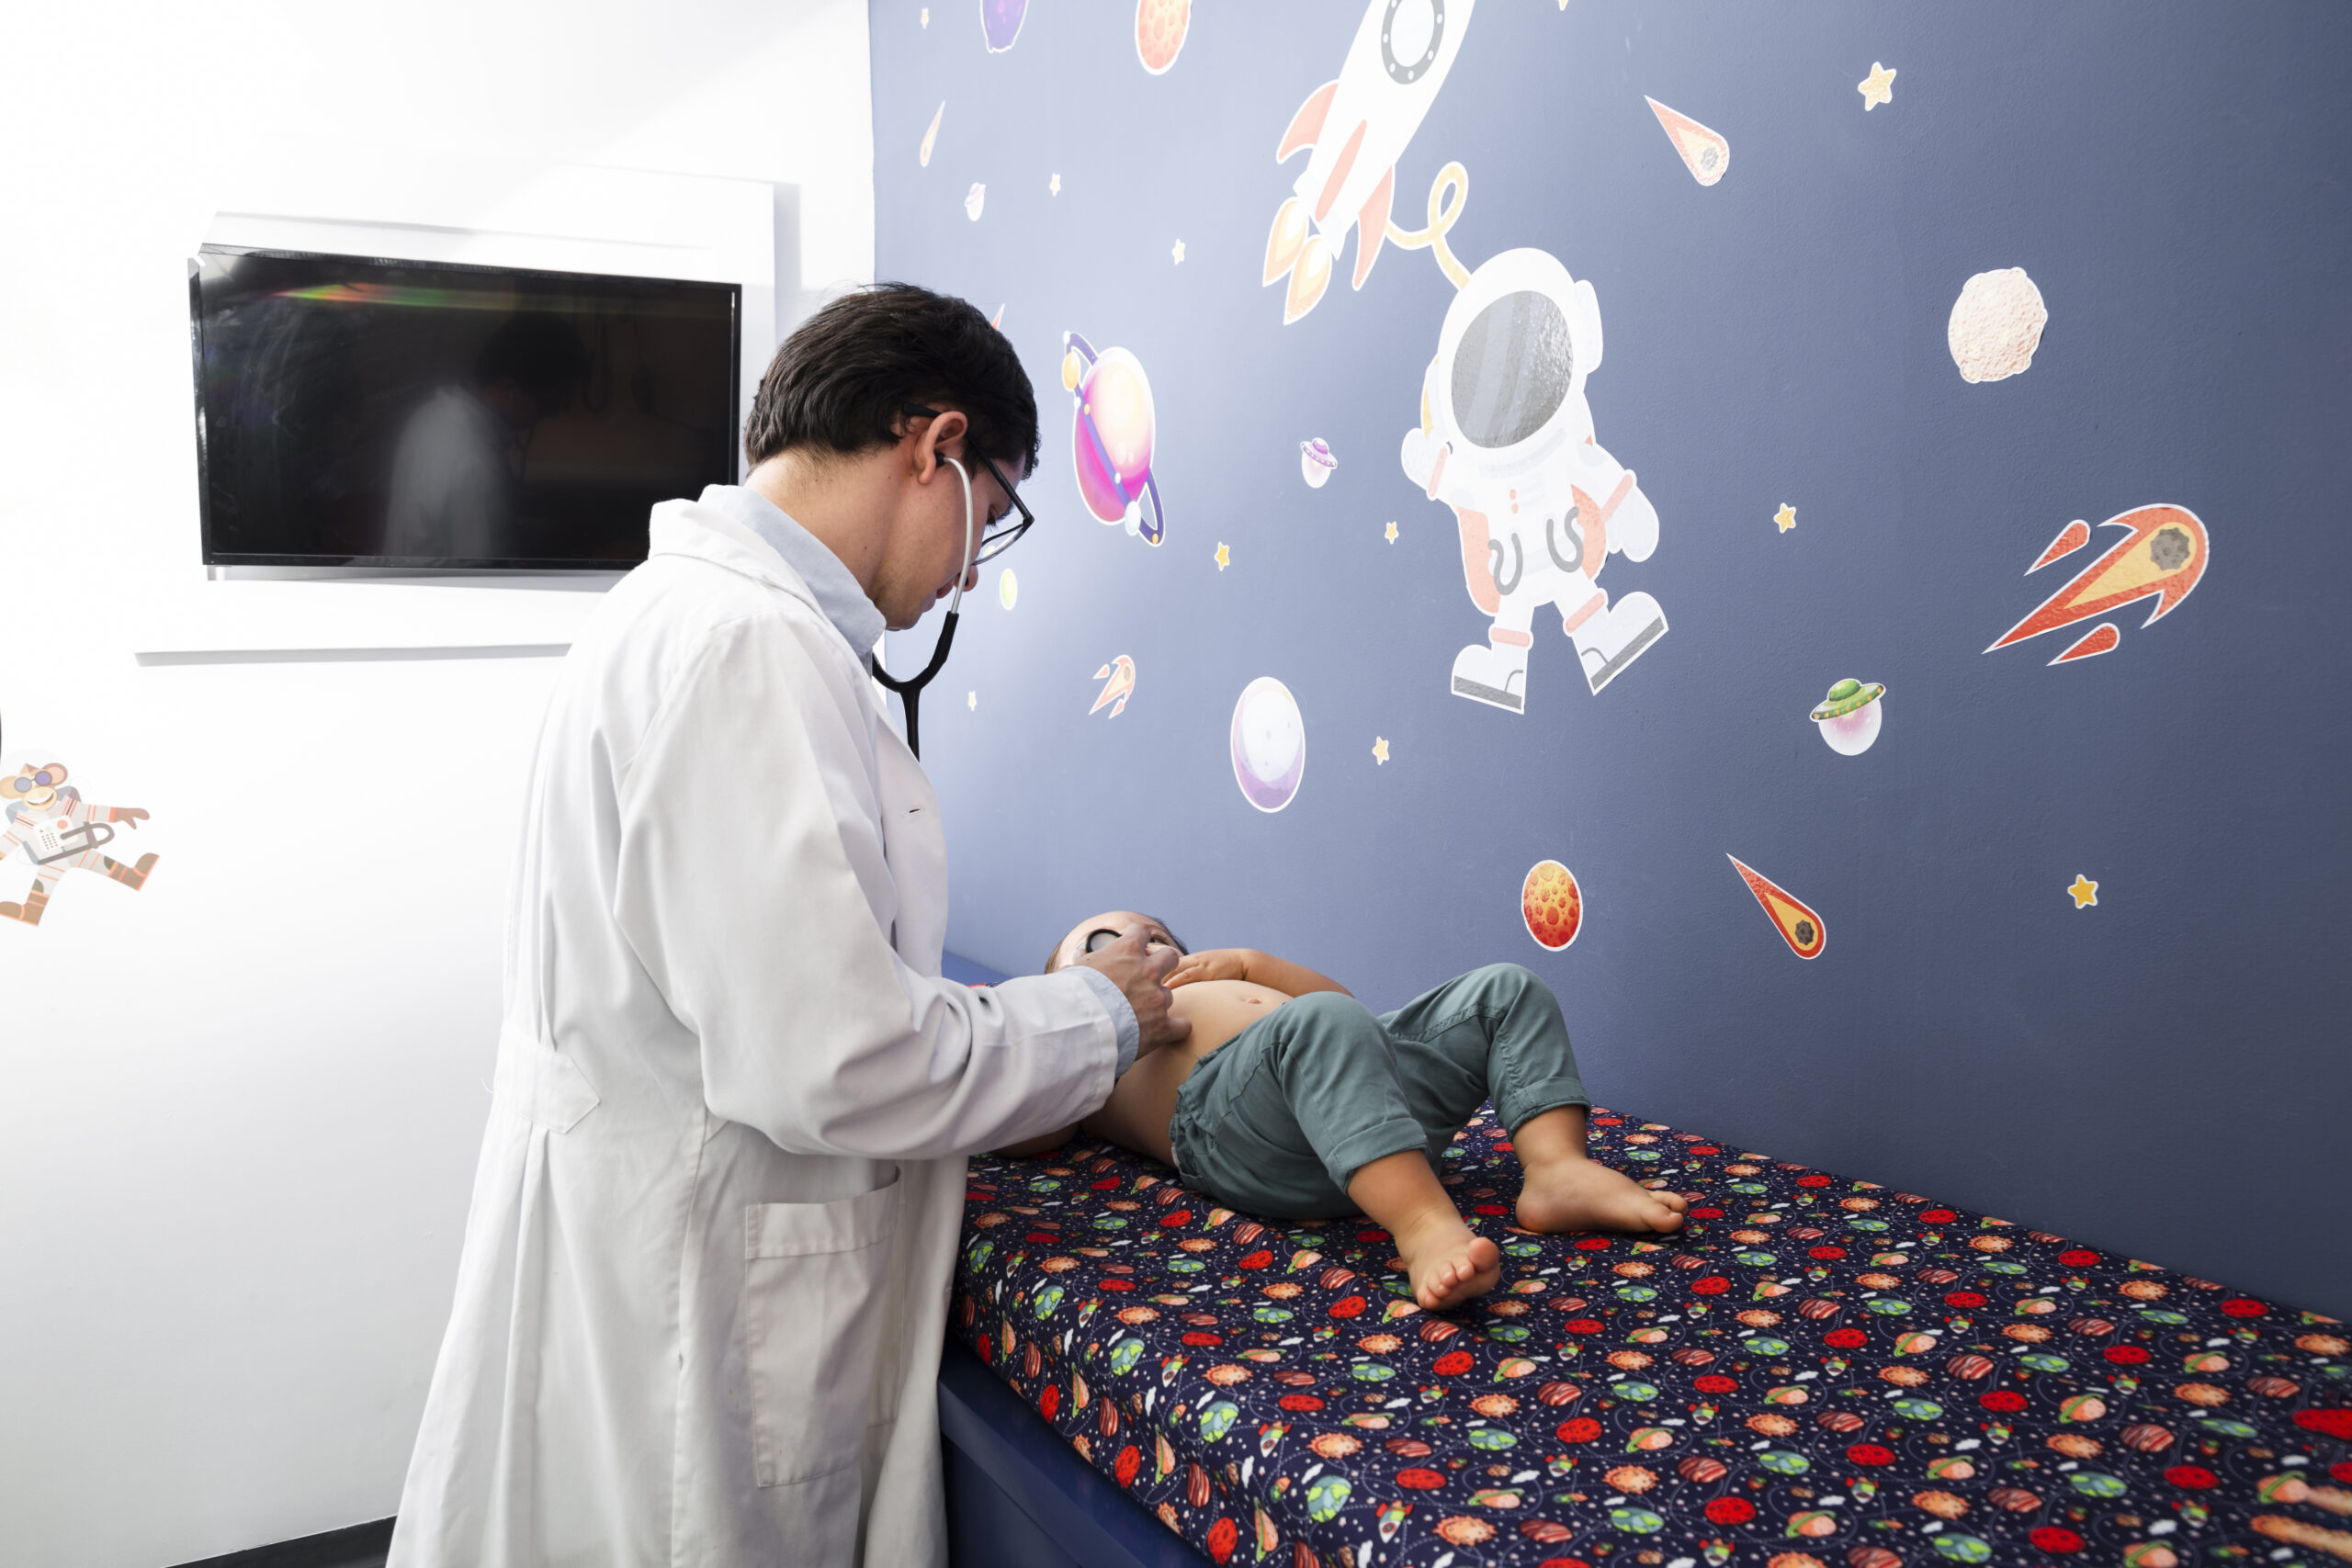 Pediatric Hematology-Oncology: Multidisciplinary Care Approach for Young Patient